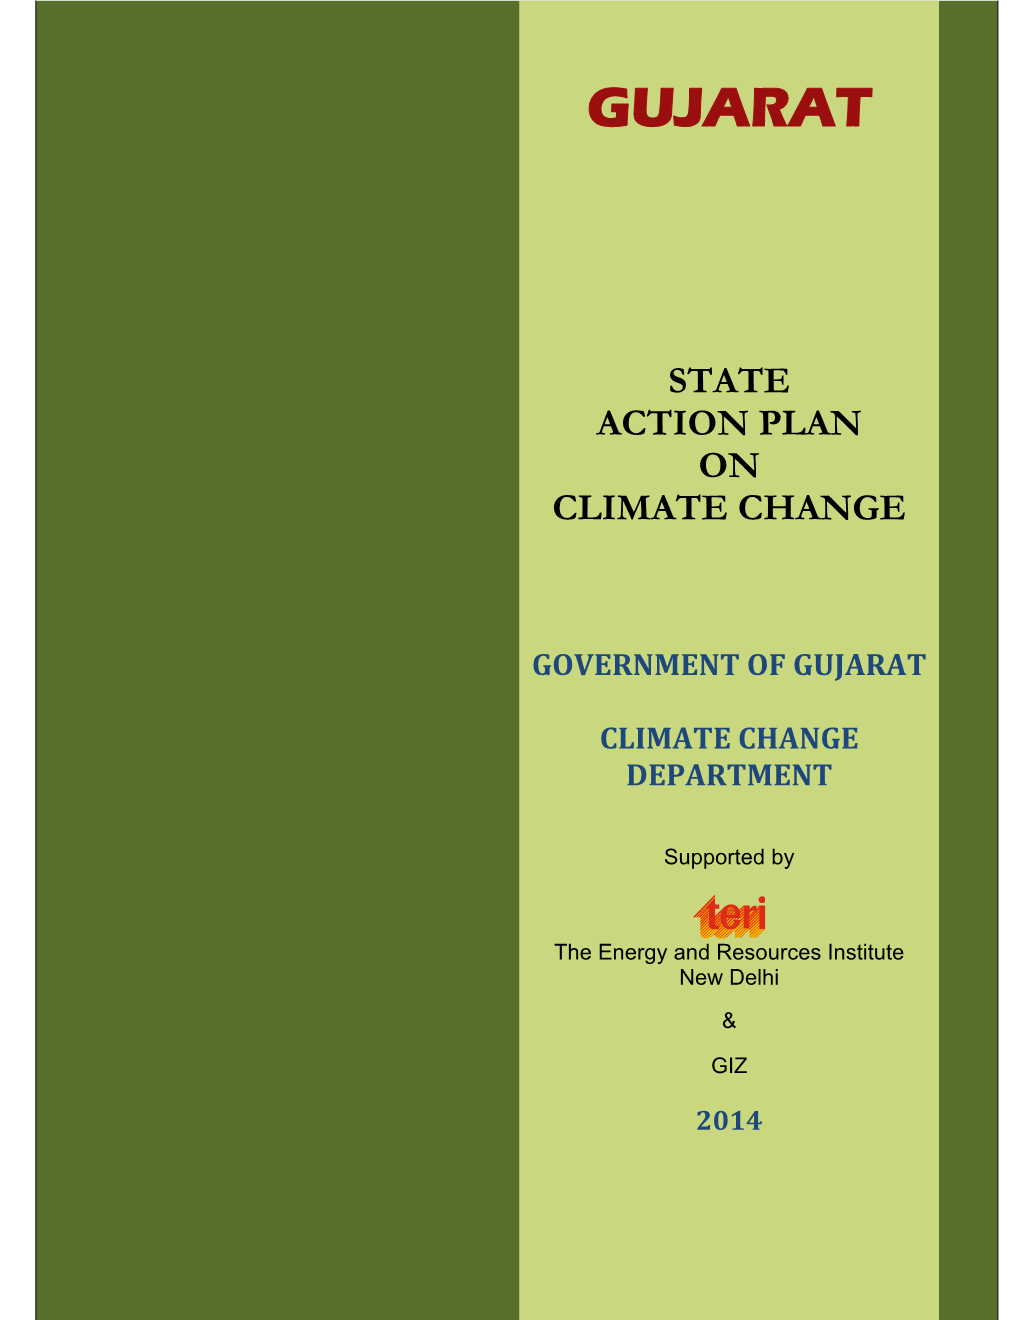 Gujarat State Action Plan on Climate Change